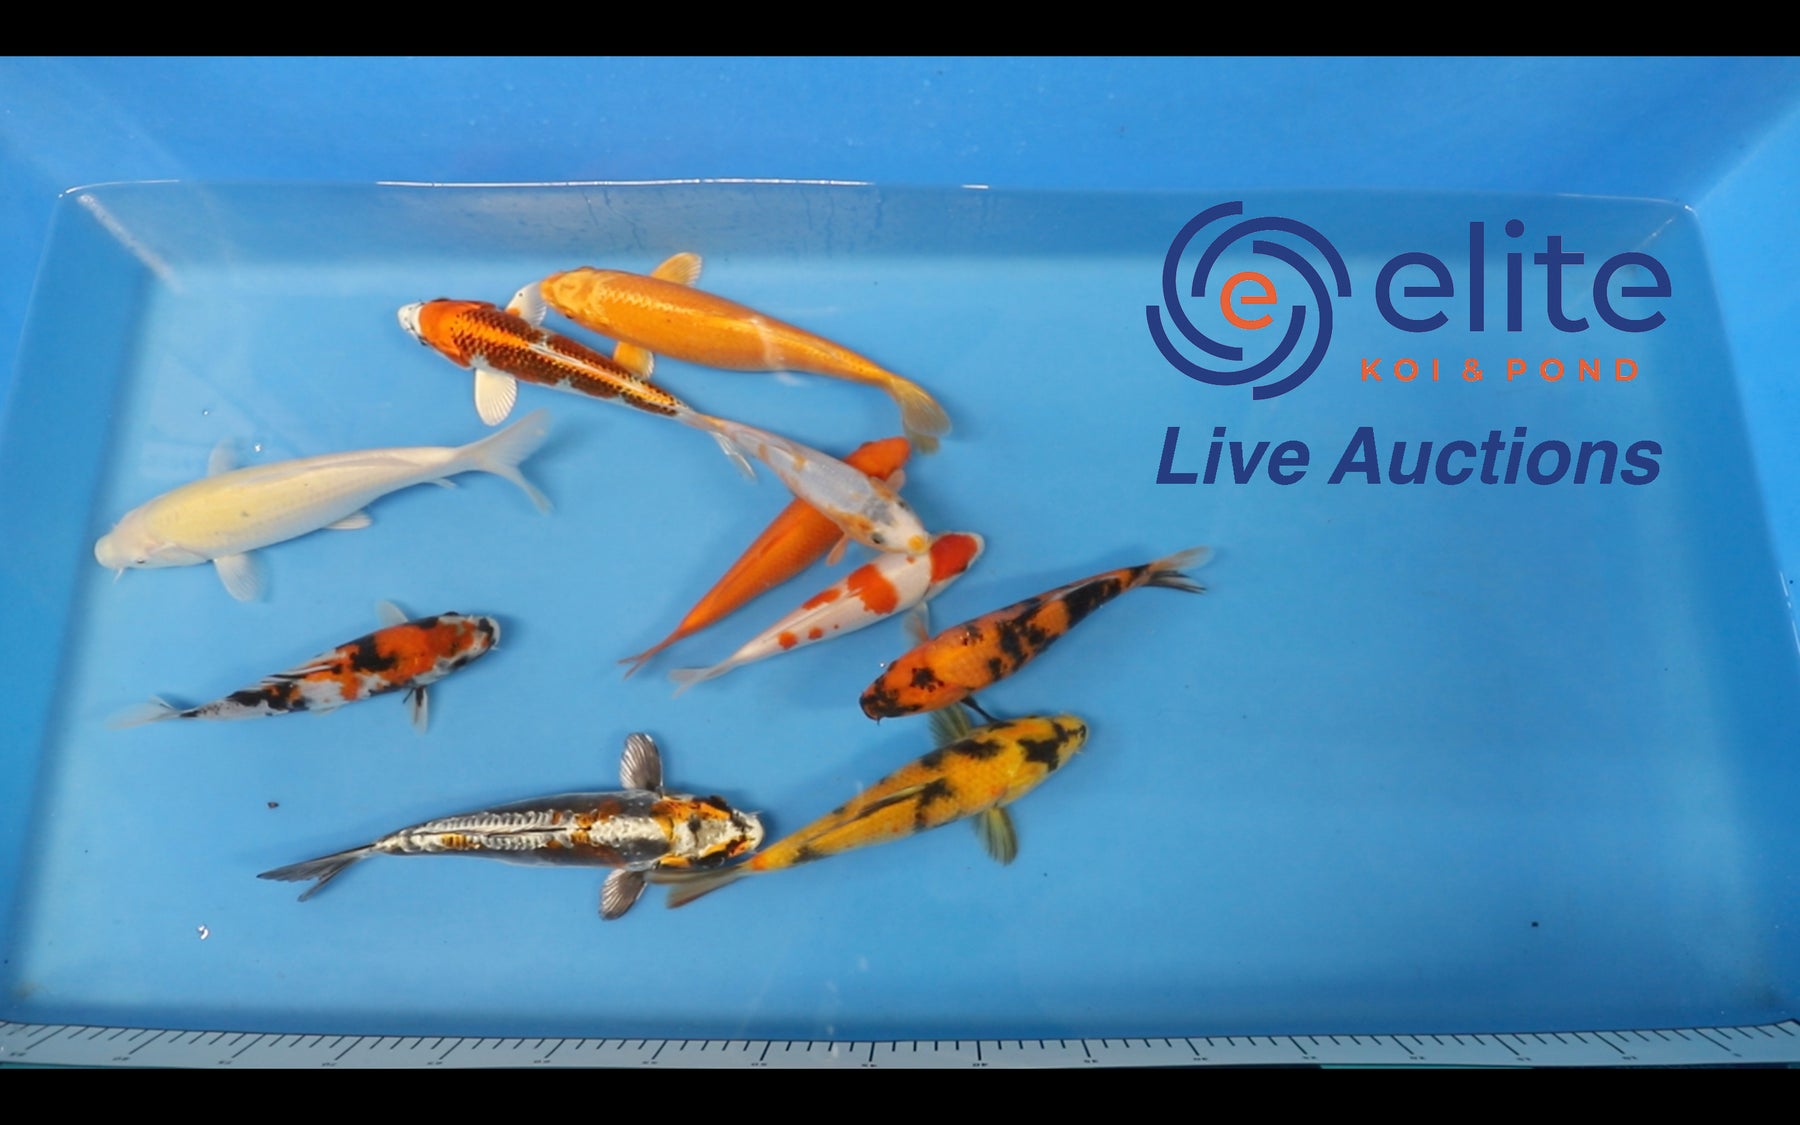 Live Auction Koi Selected for Saturday 13th January